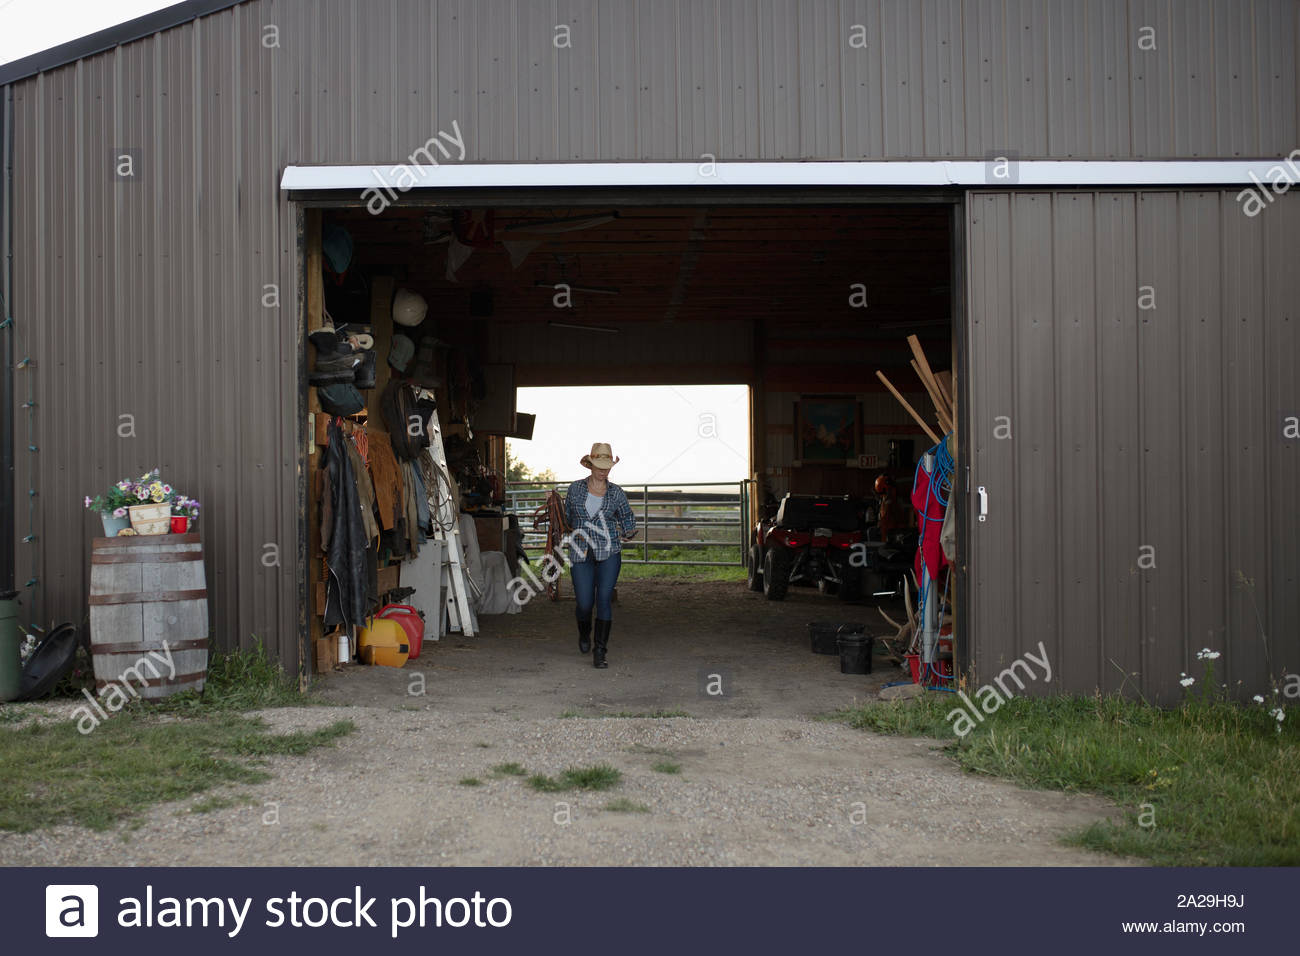 Woman walking out of barn with horse tack Stock Photo